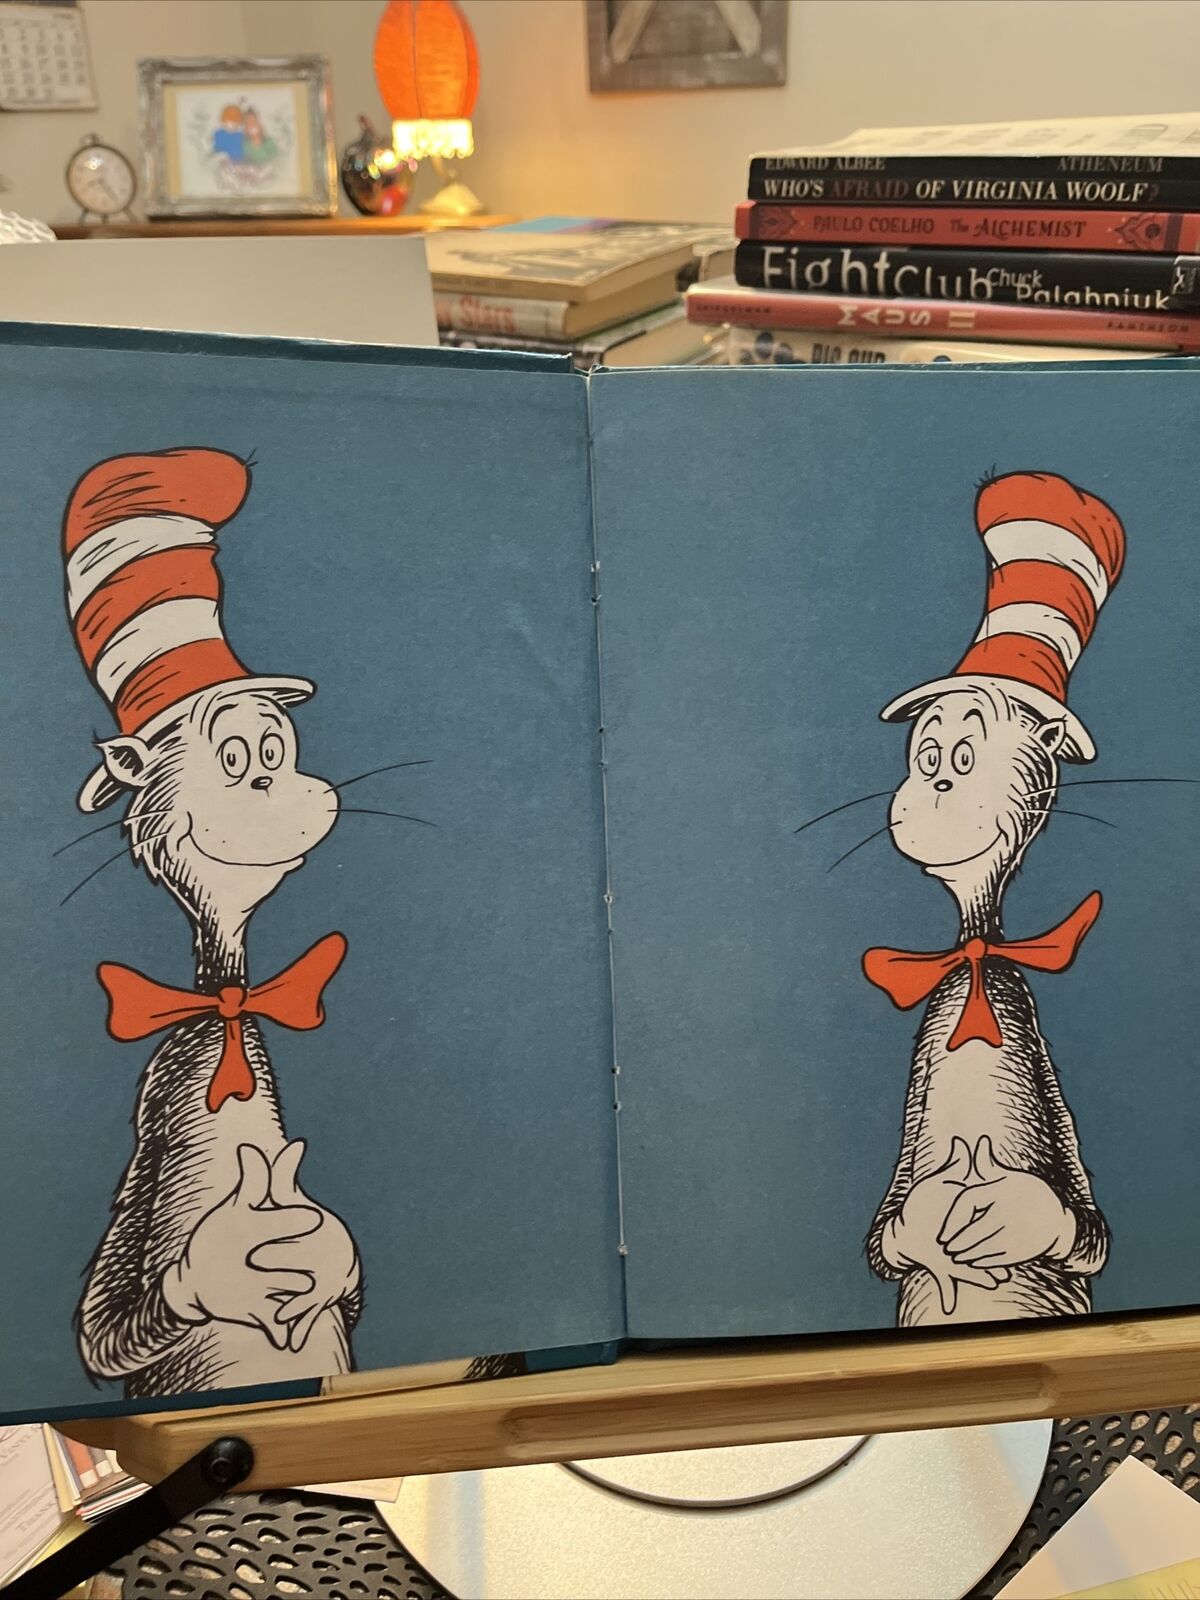 The Cat In The Hat Signed Late 60’s? No Marks Inside!